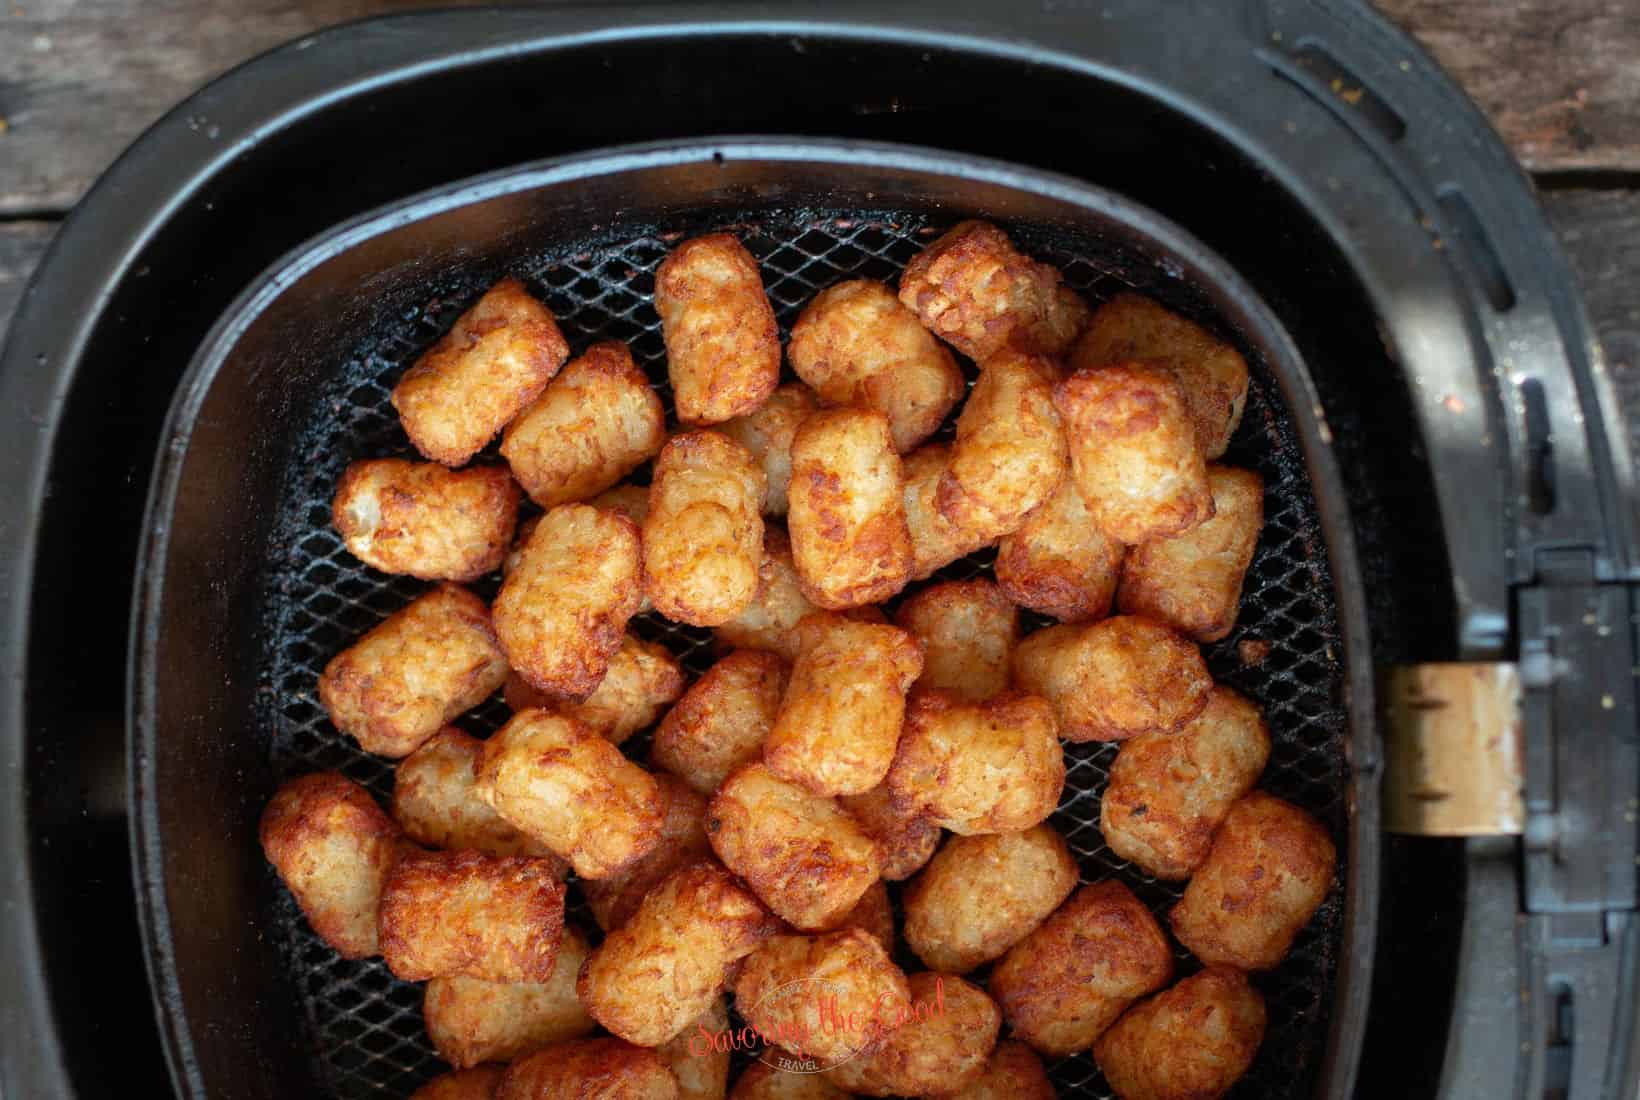 vertical image of cooked tater tots in an air fryer basket.